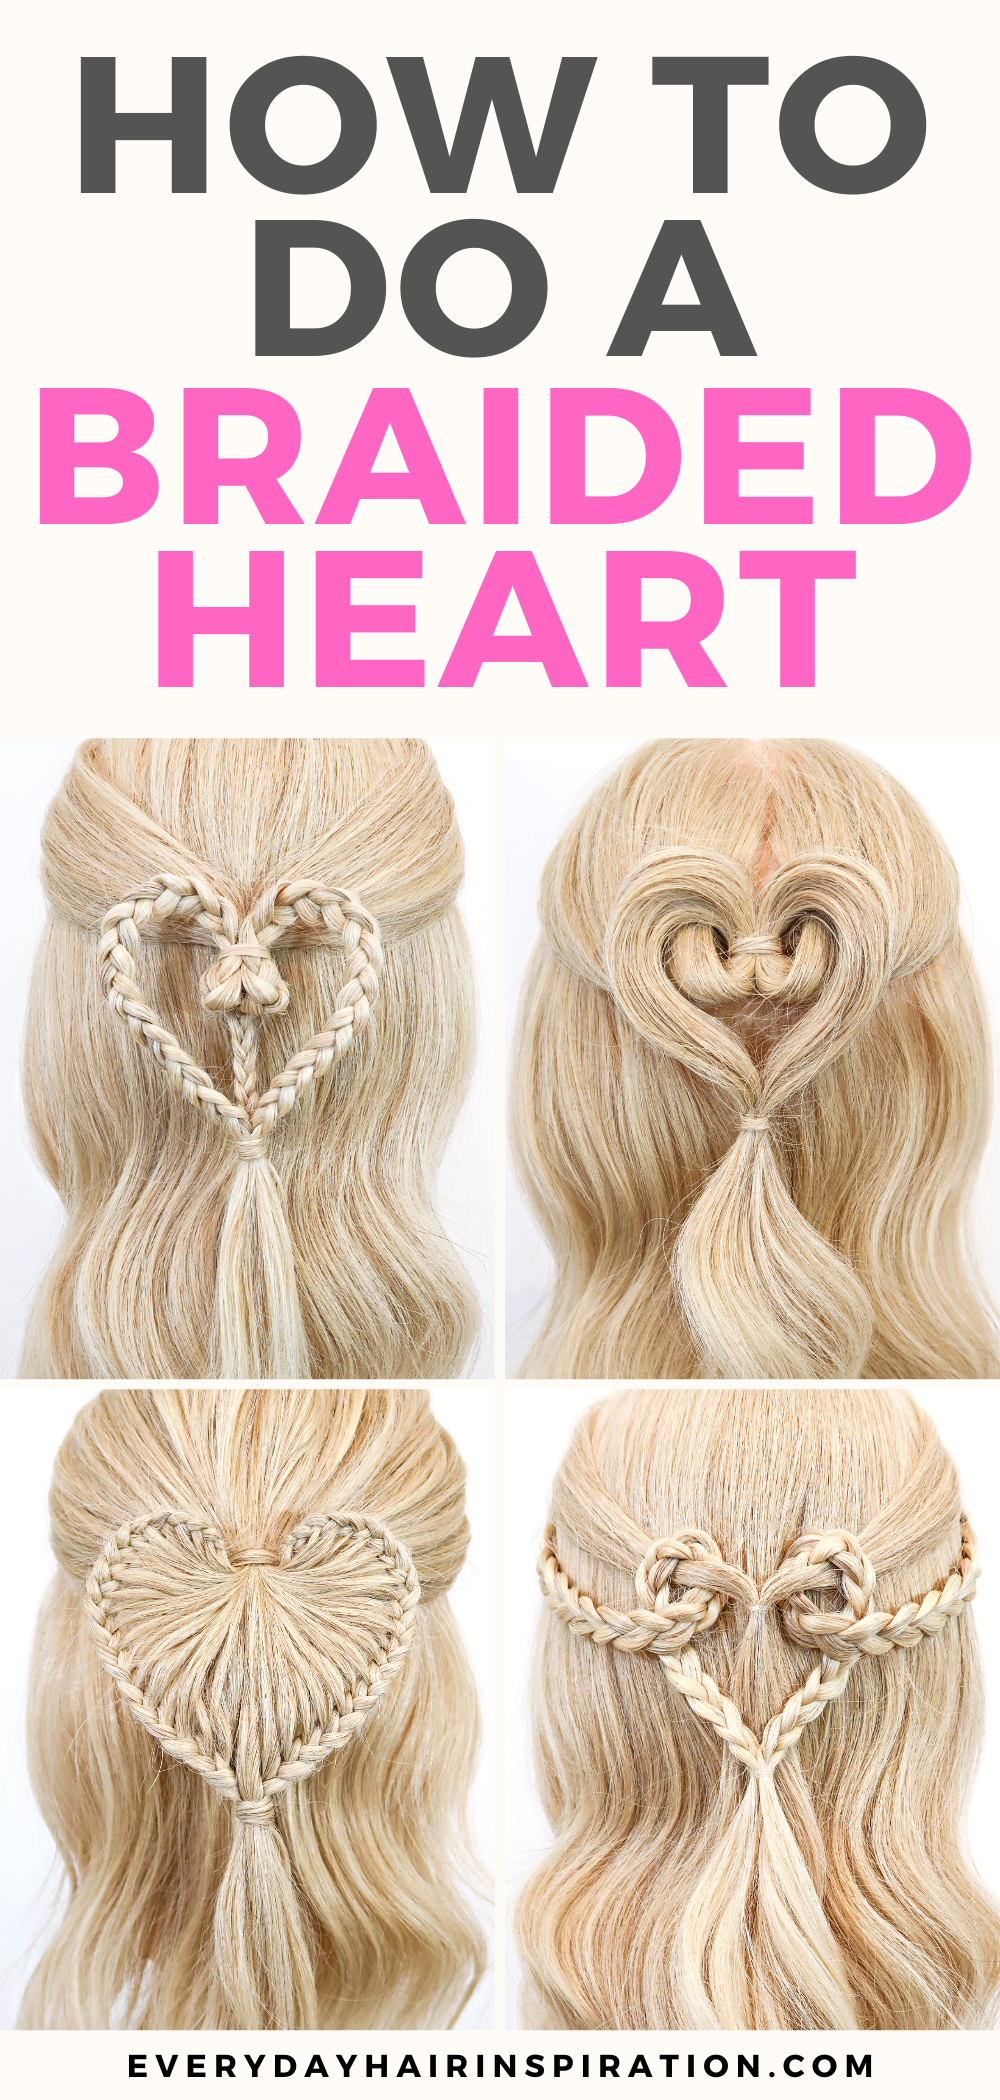 Braided Heart For Valentines Day!